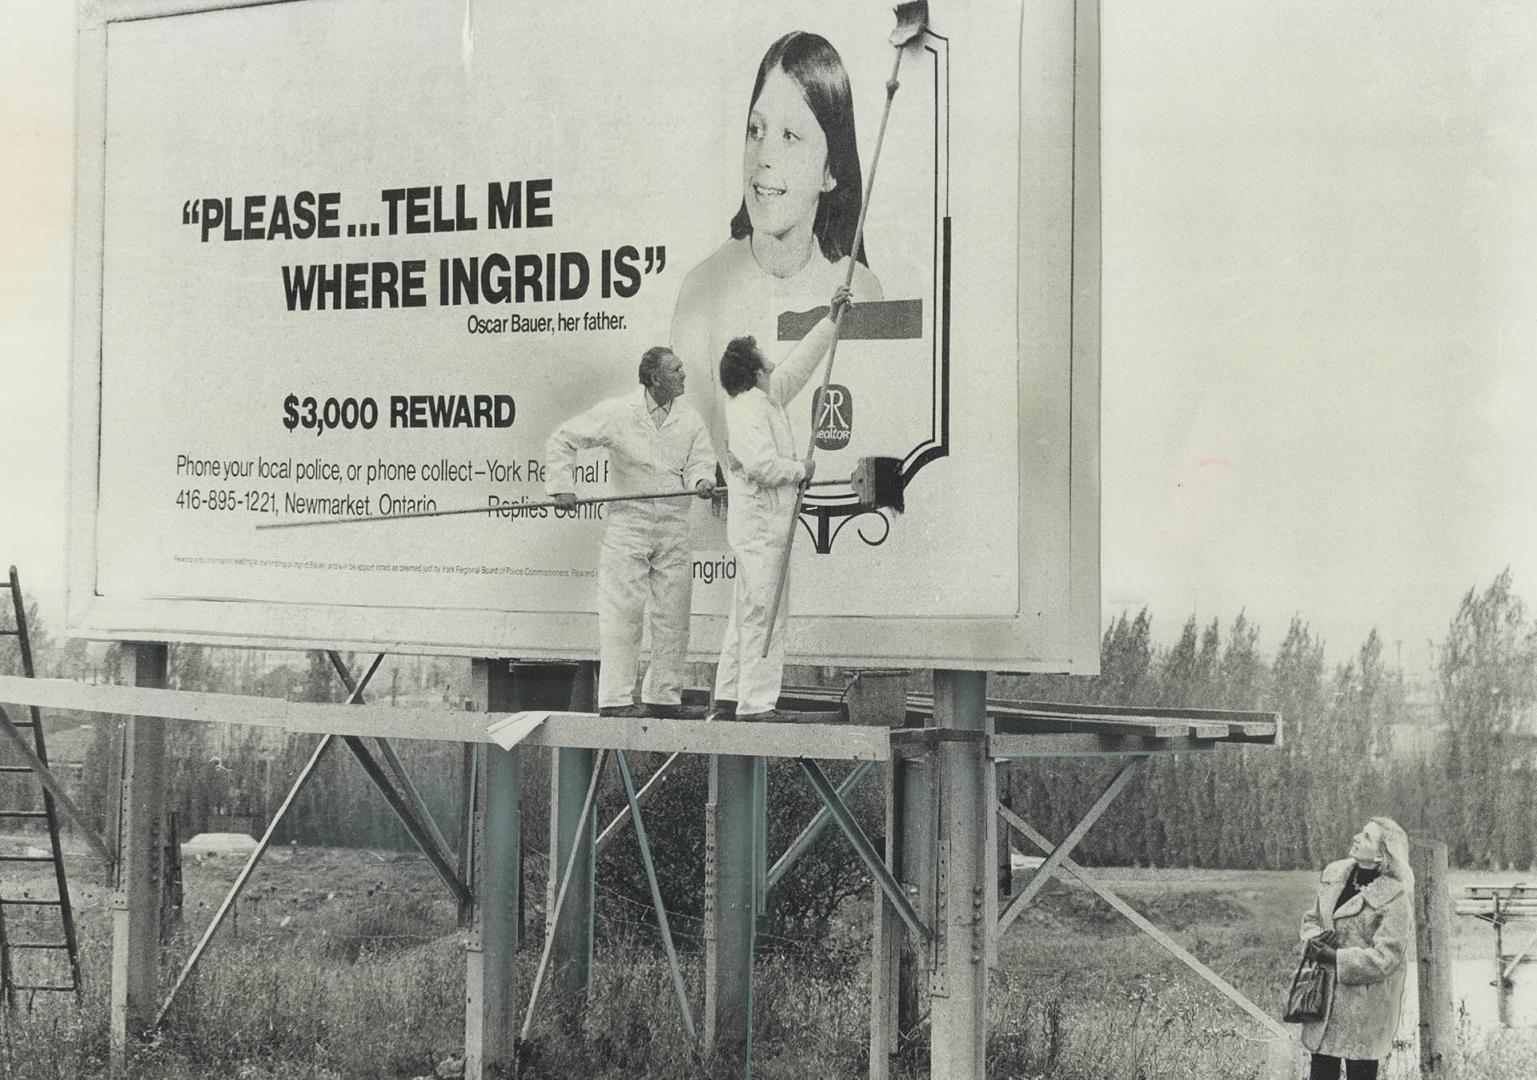 While a mother watches, one of 42 billboard crews across Canada pastes sign seeking 14-year-old Ingrid Bauer, missing from her Kleinburg home since Au(...)